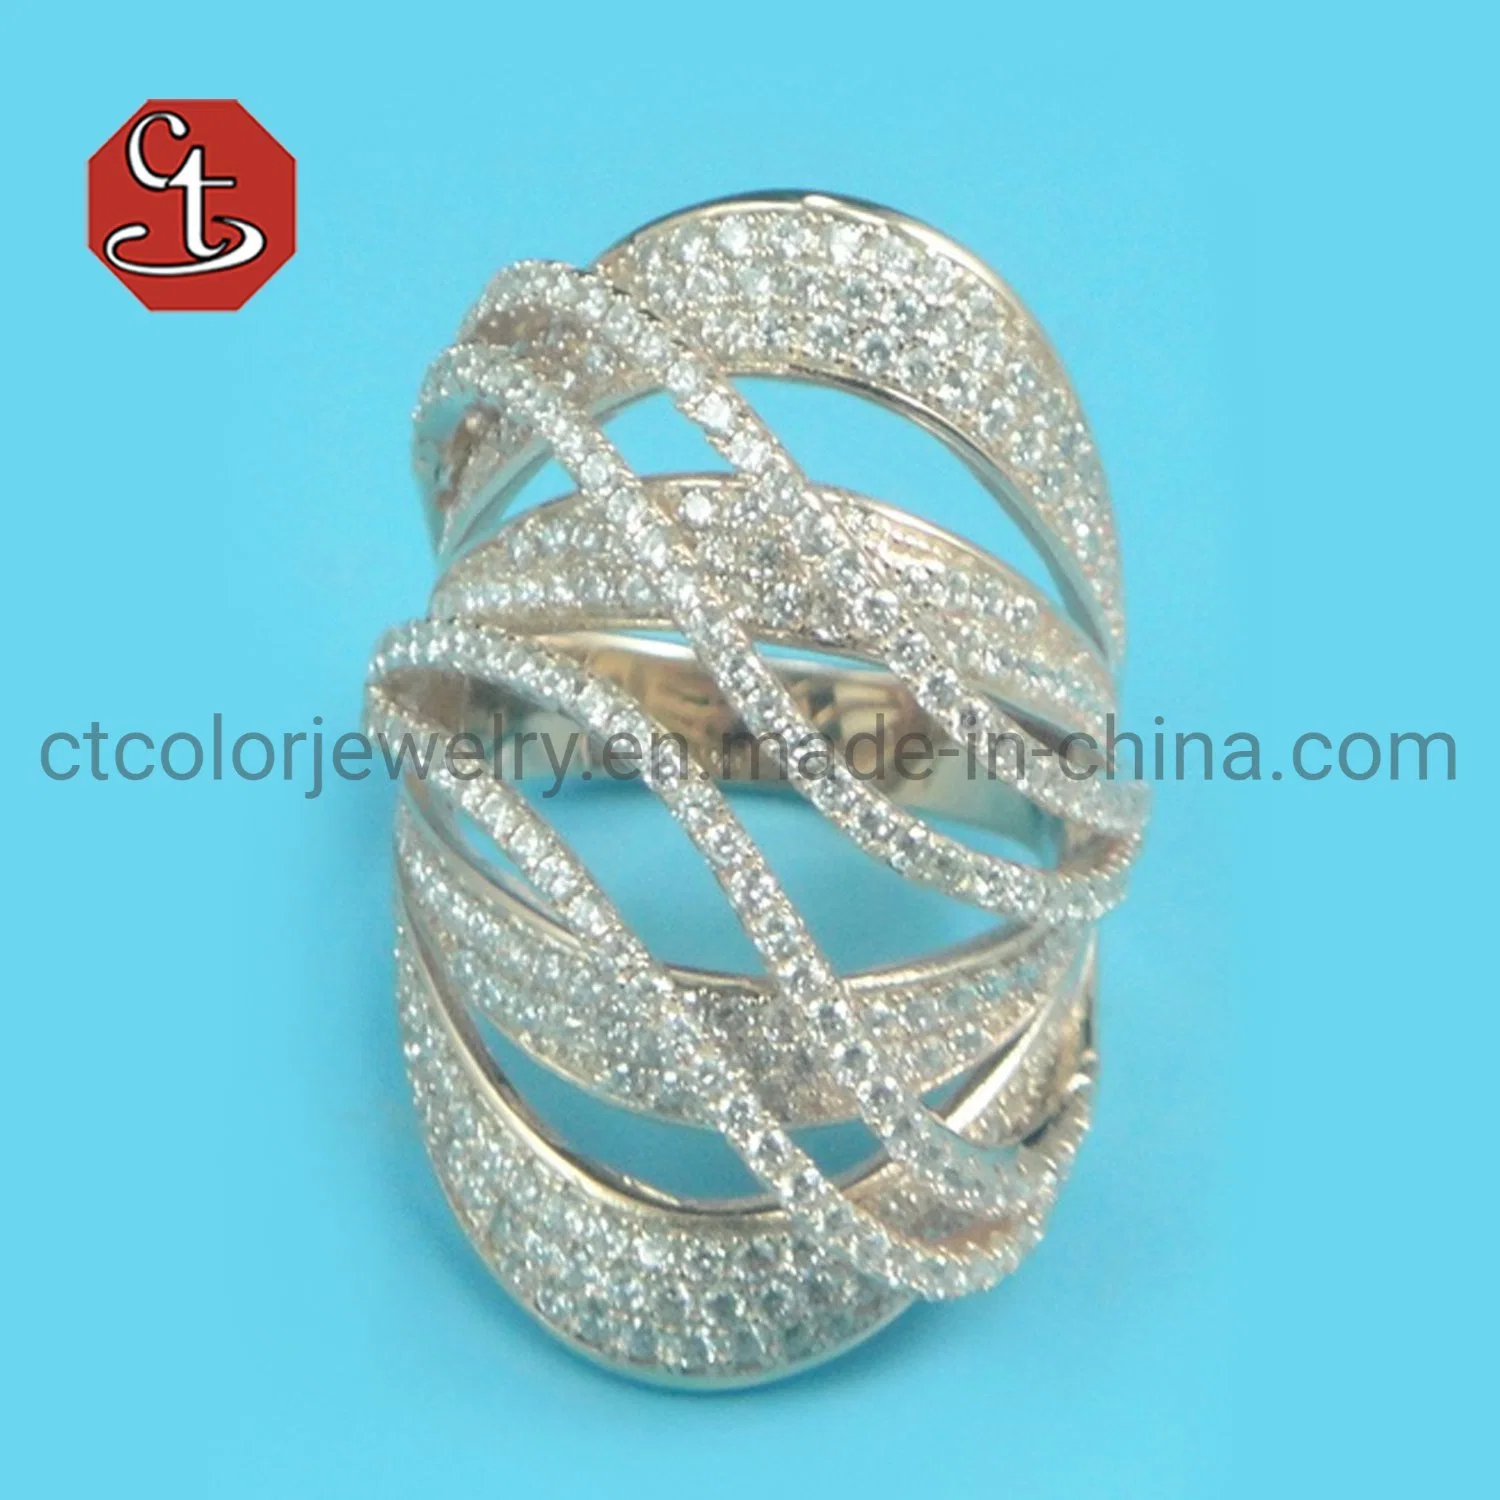 New Trend Jewelry Exaggerated Geometric Lines Zirconia Women's Ring Party Accessory Favors